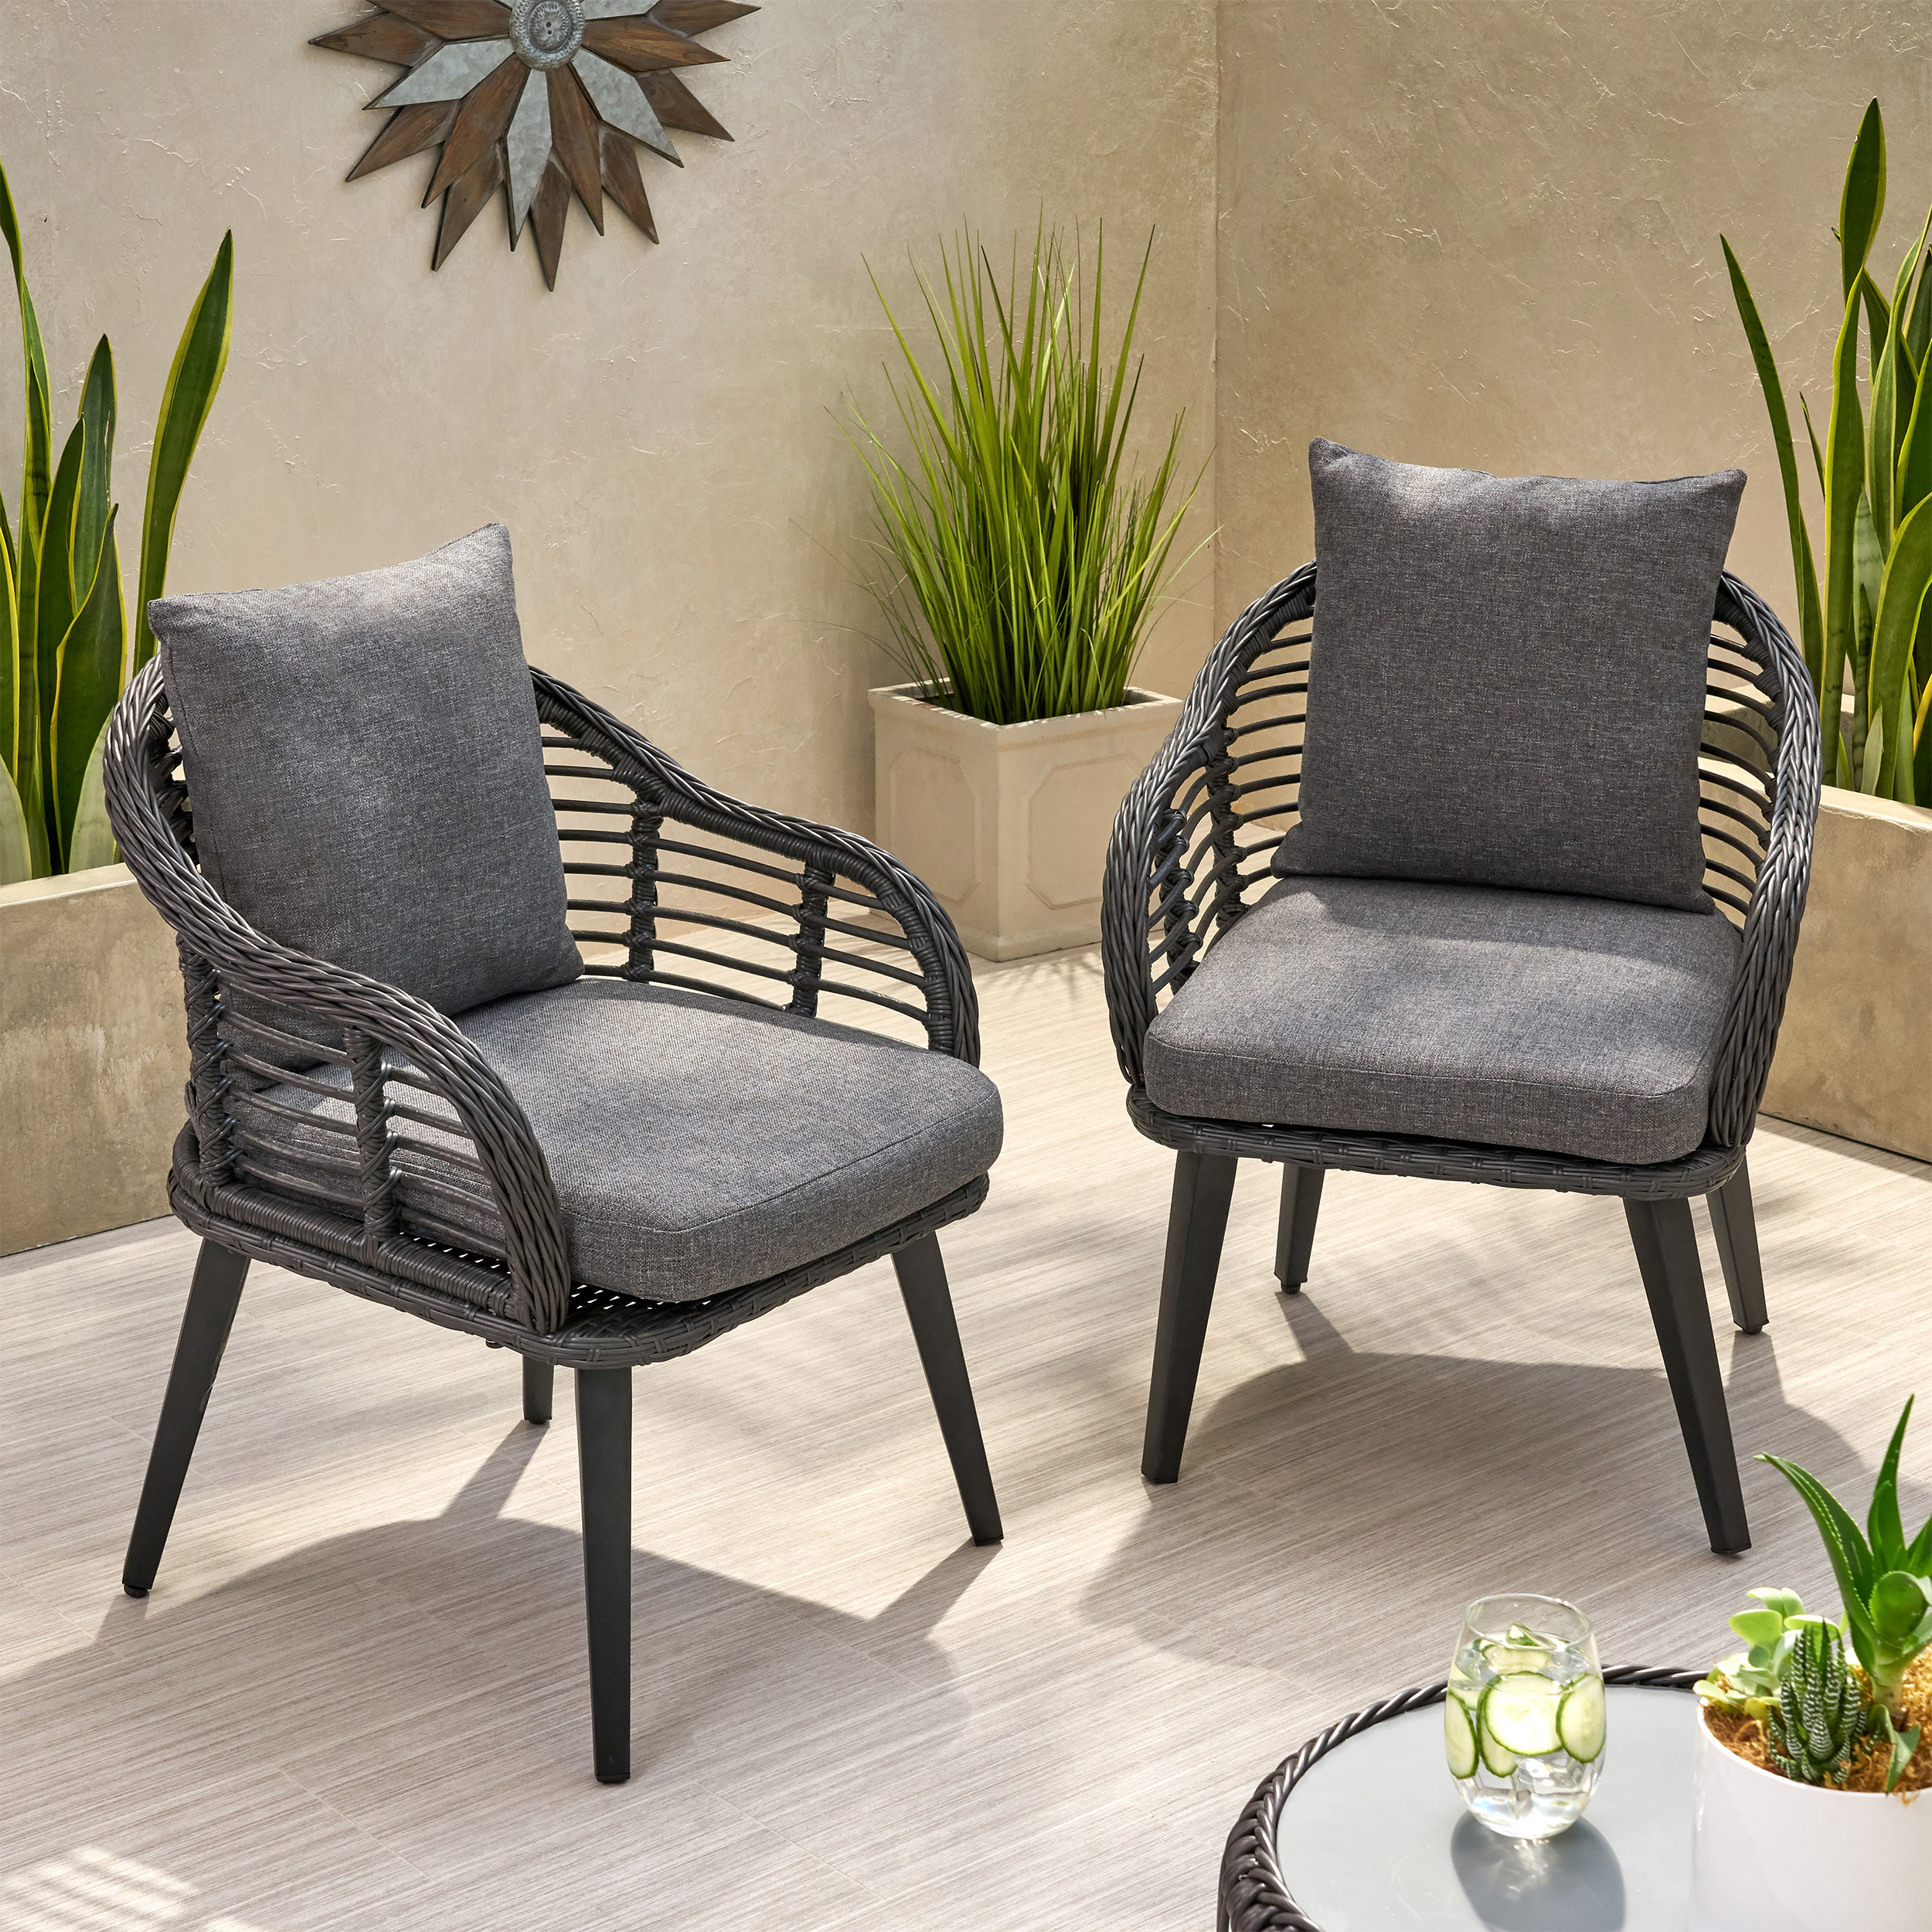 Madison Outdoor Wicker Club Chairs With Cushions (Set Of 2) - Gray, Black, Dark Gray